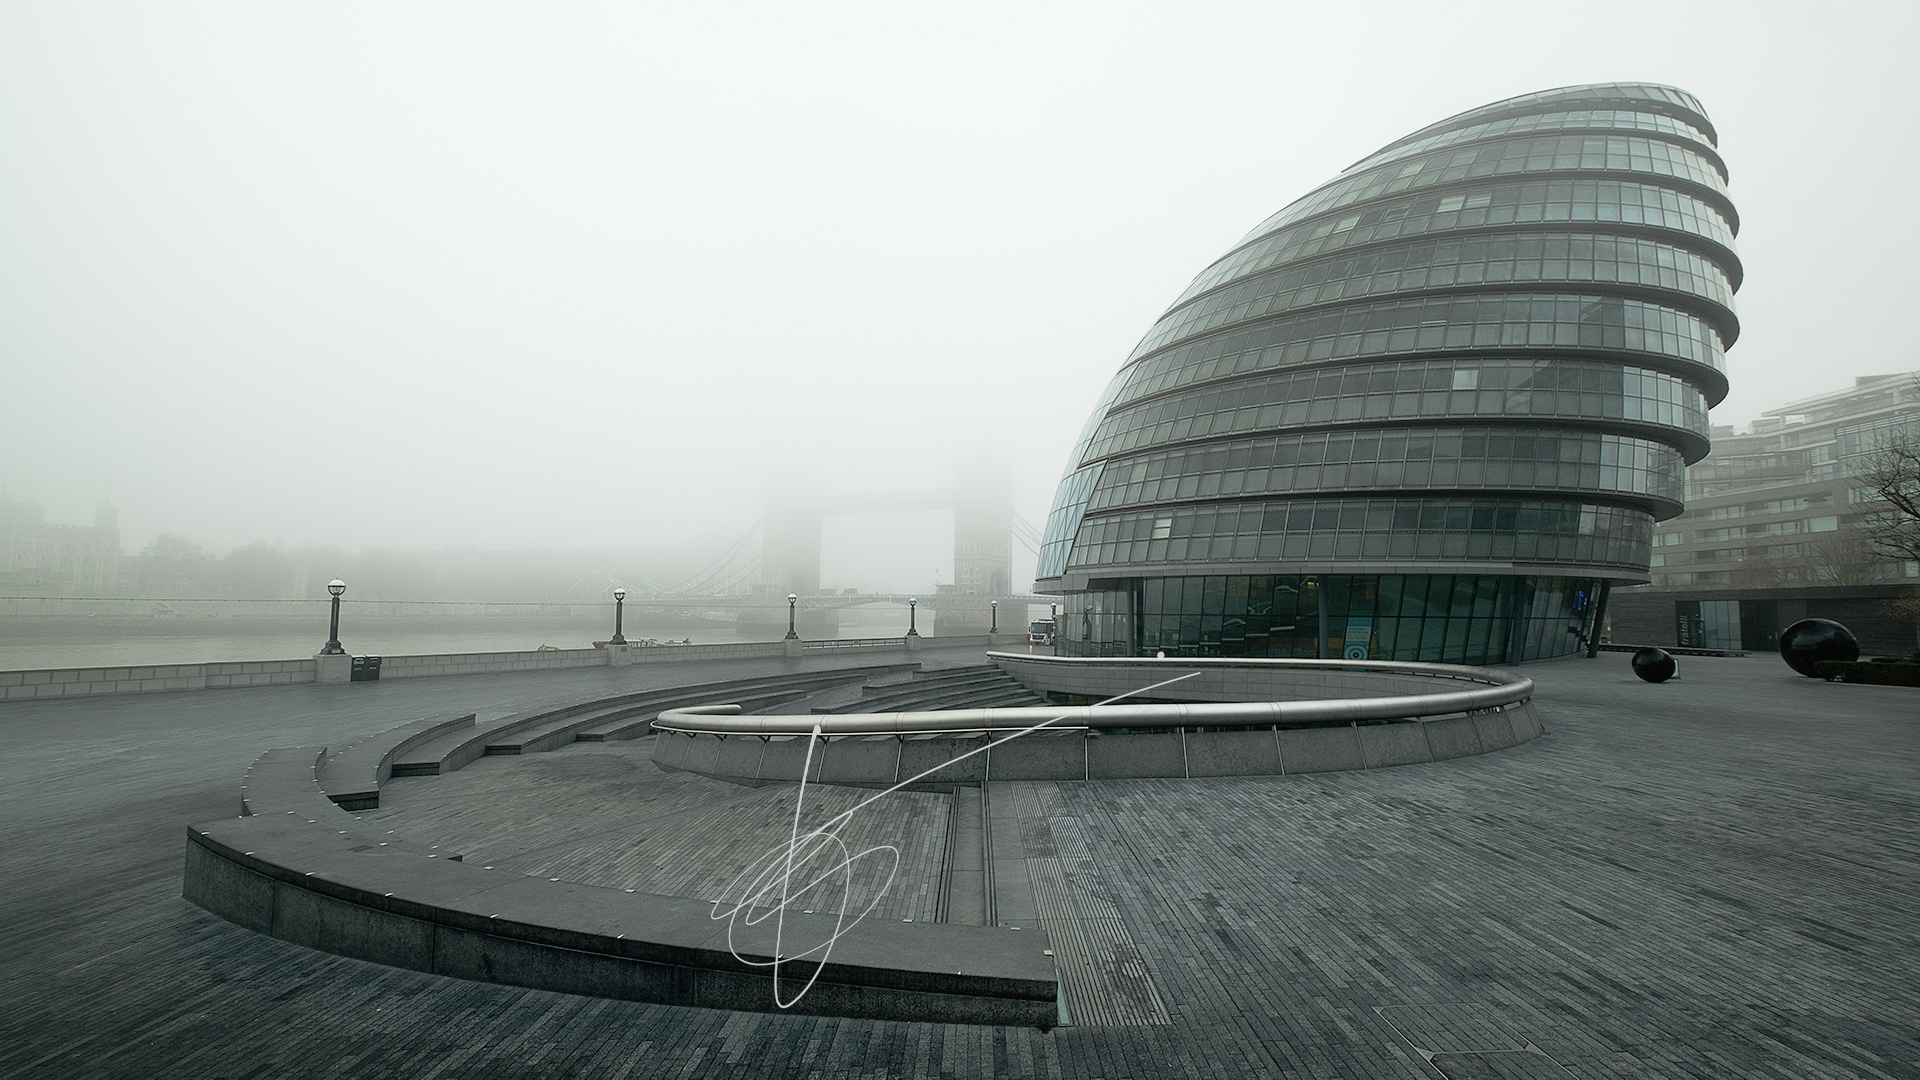 The area of City Hall in London, with Tower Bridge hidden behind the fog on the background